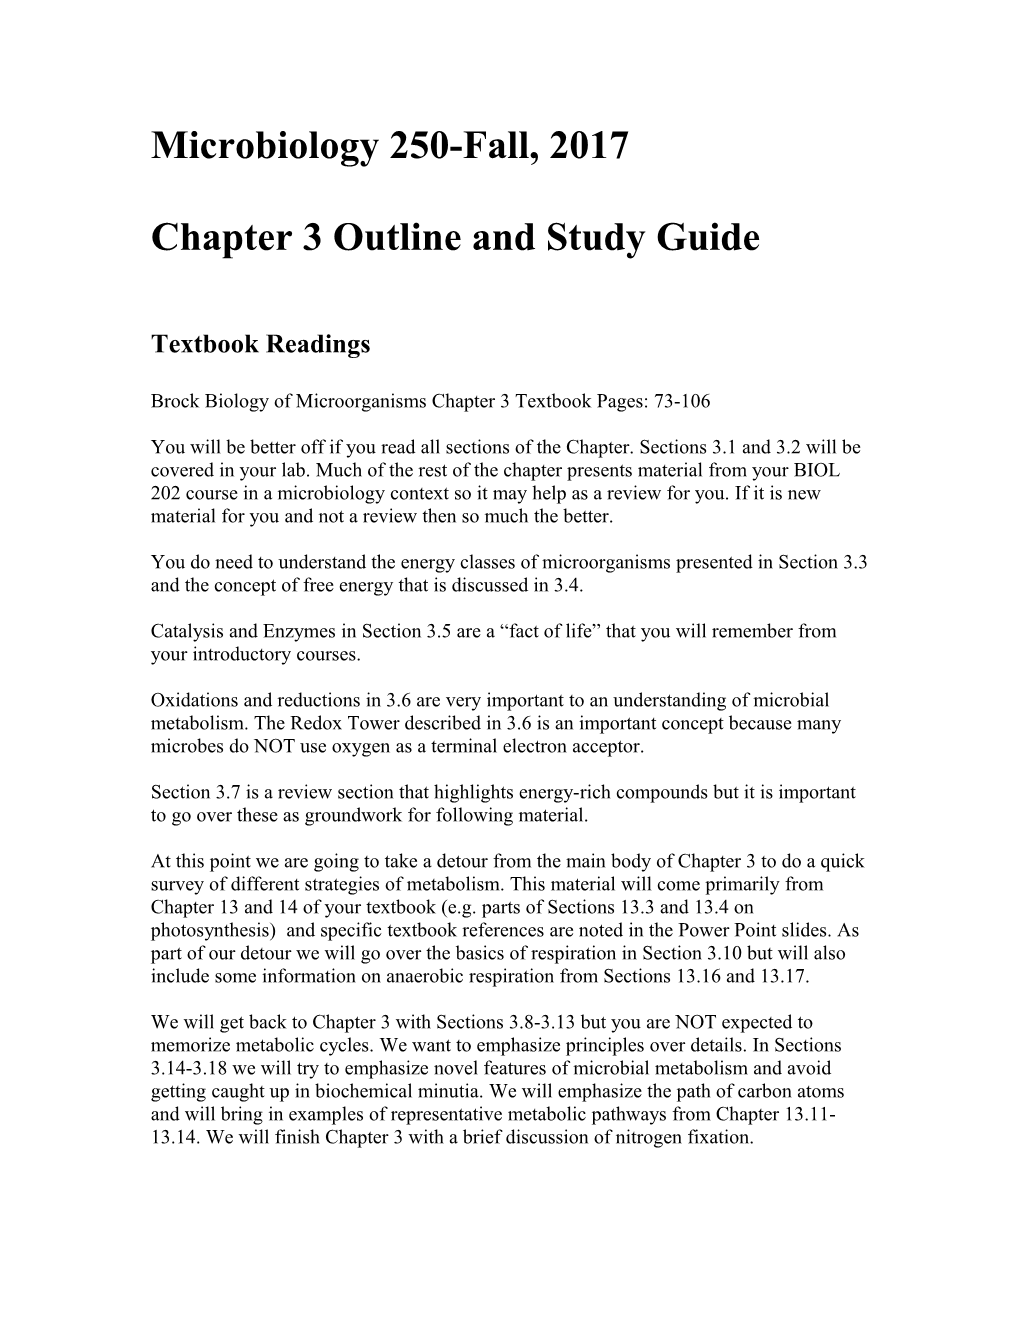 Chapter 3 Outline and Study Guide